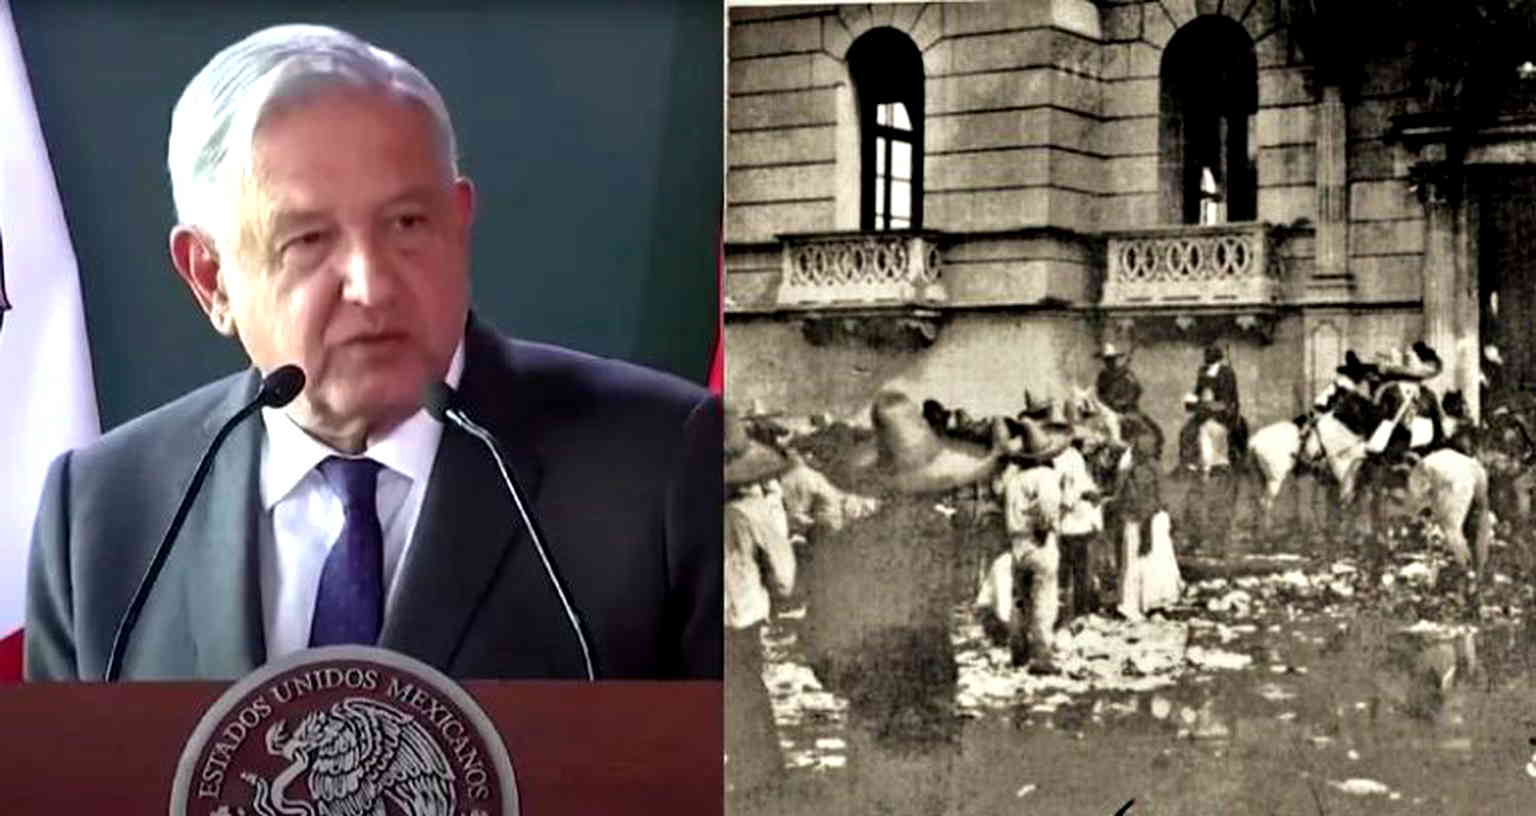 Mexico’s President Apologizes for the 1911 Massacre that Killed Over 300 Chinese People